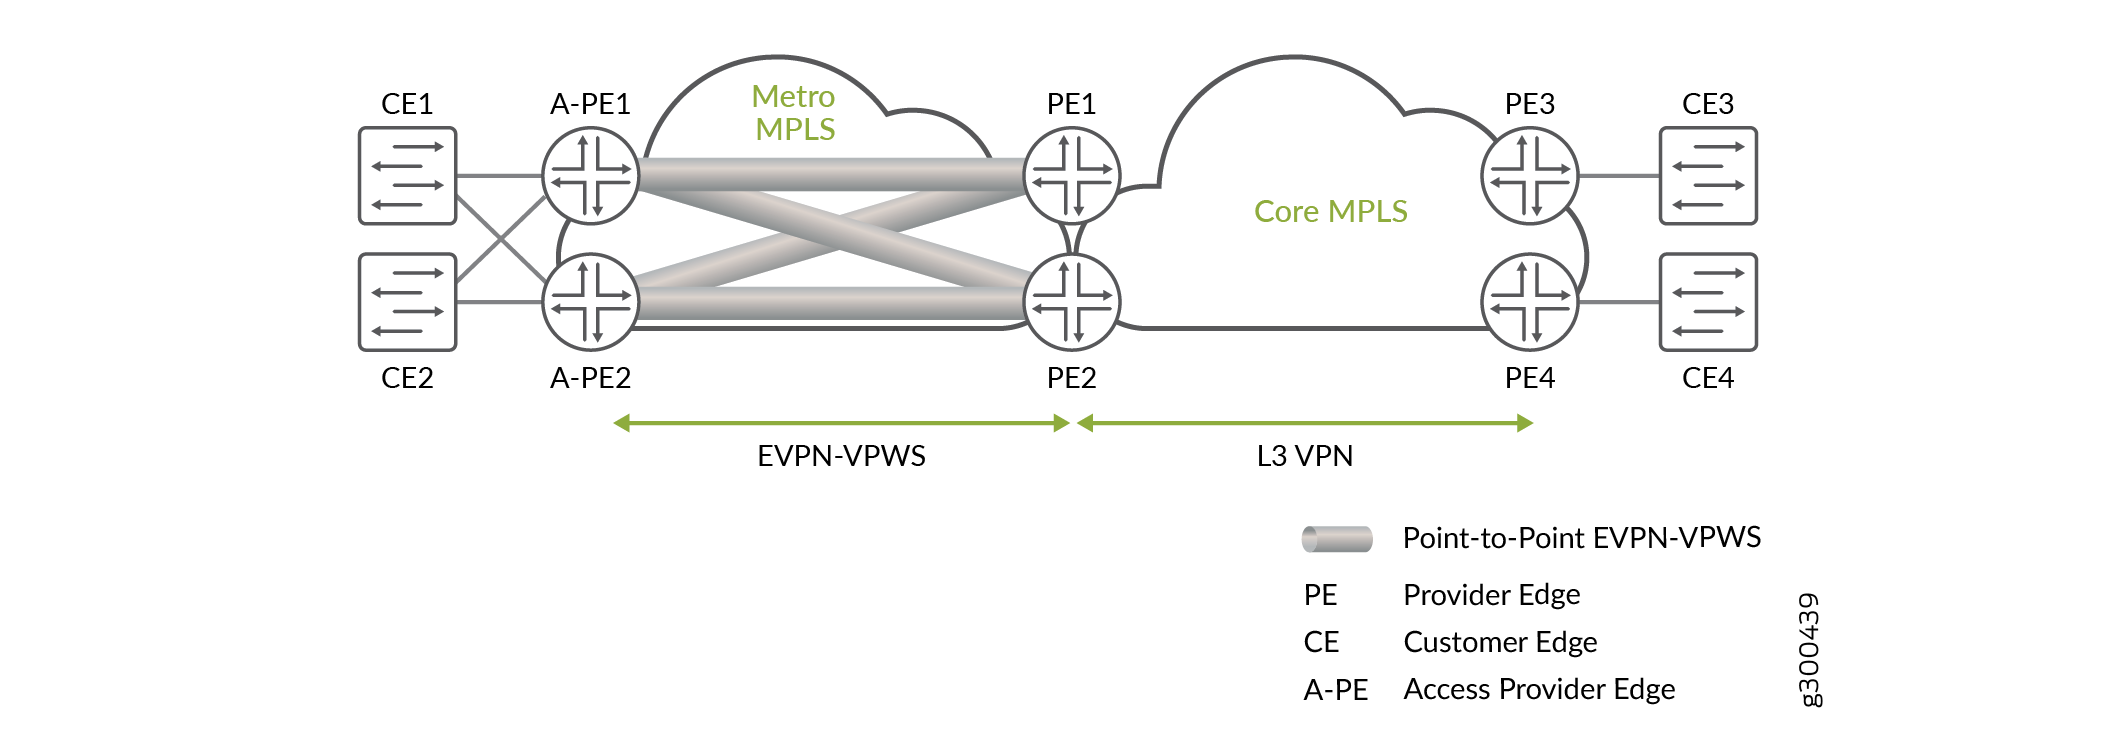 Multihomed network with EVPN-VPWS service terminating in a Layer 3 VPN